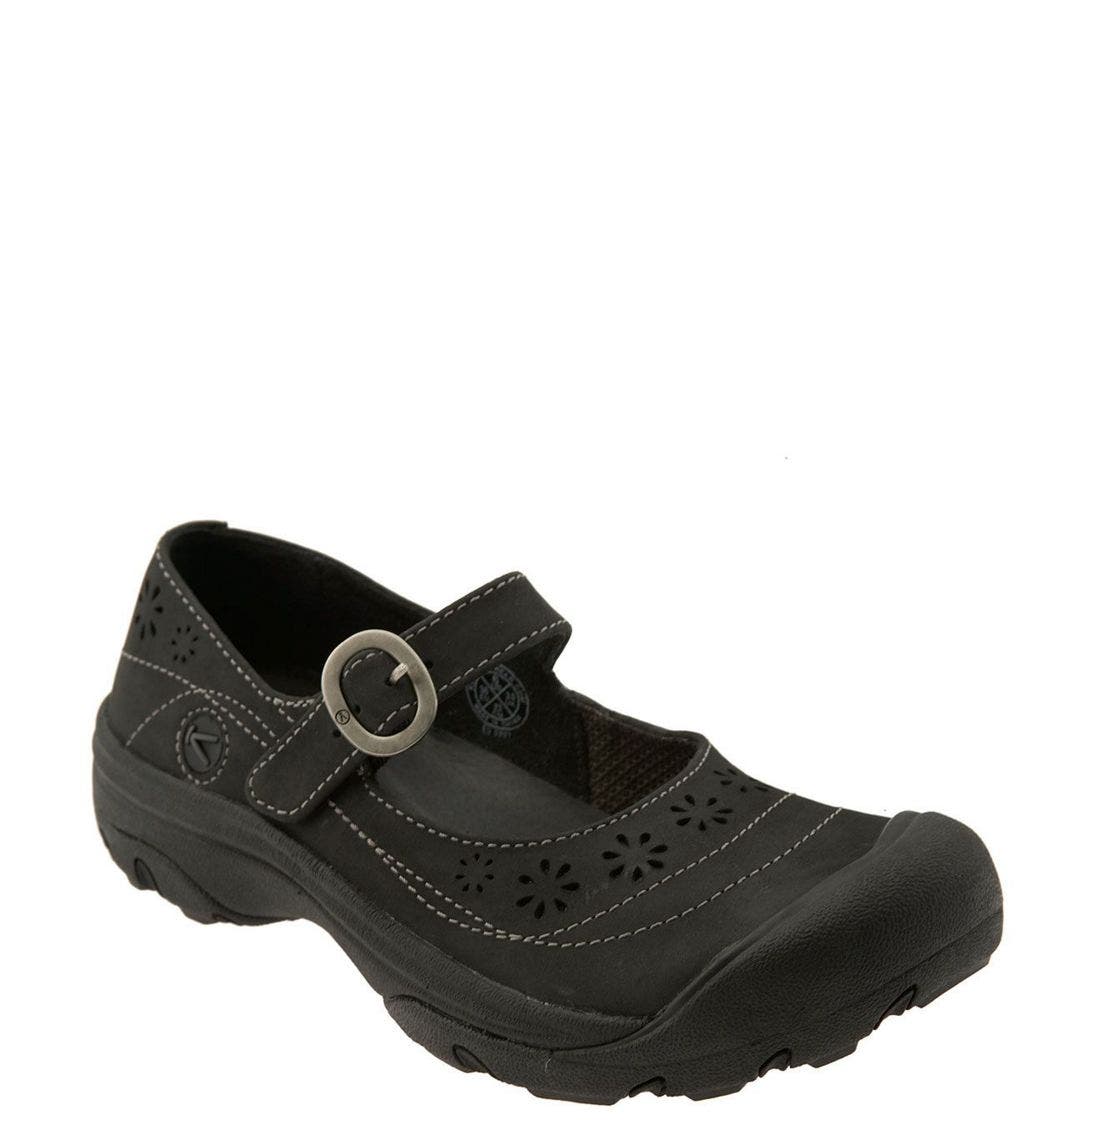 keen mary jane sandals